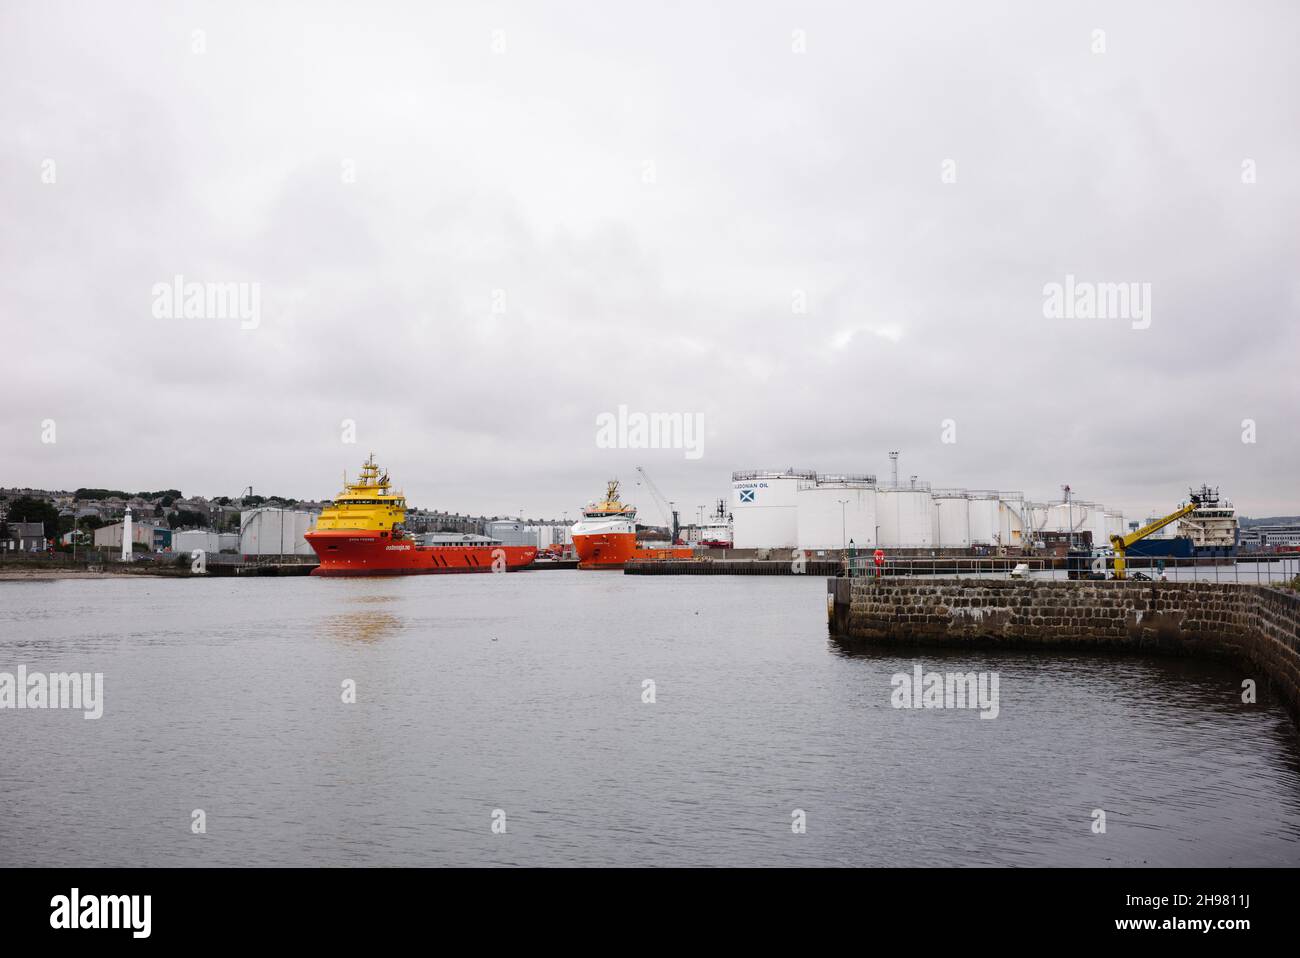 Offshore oil & gas industry supply vessels docked in the harbour of Aberdeen. Stock Photo